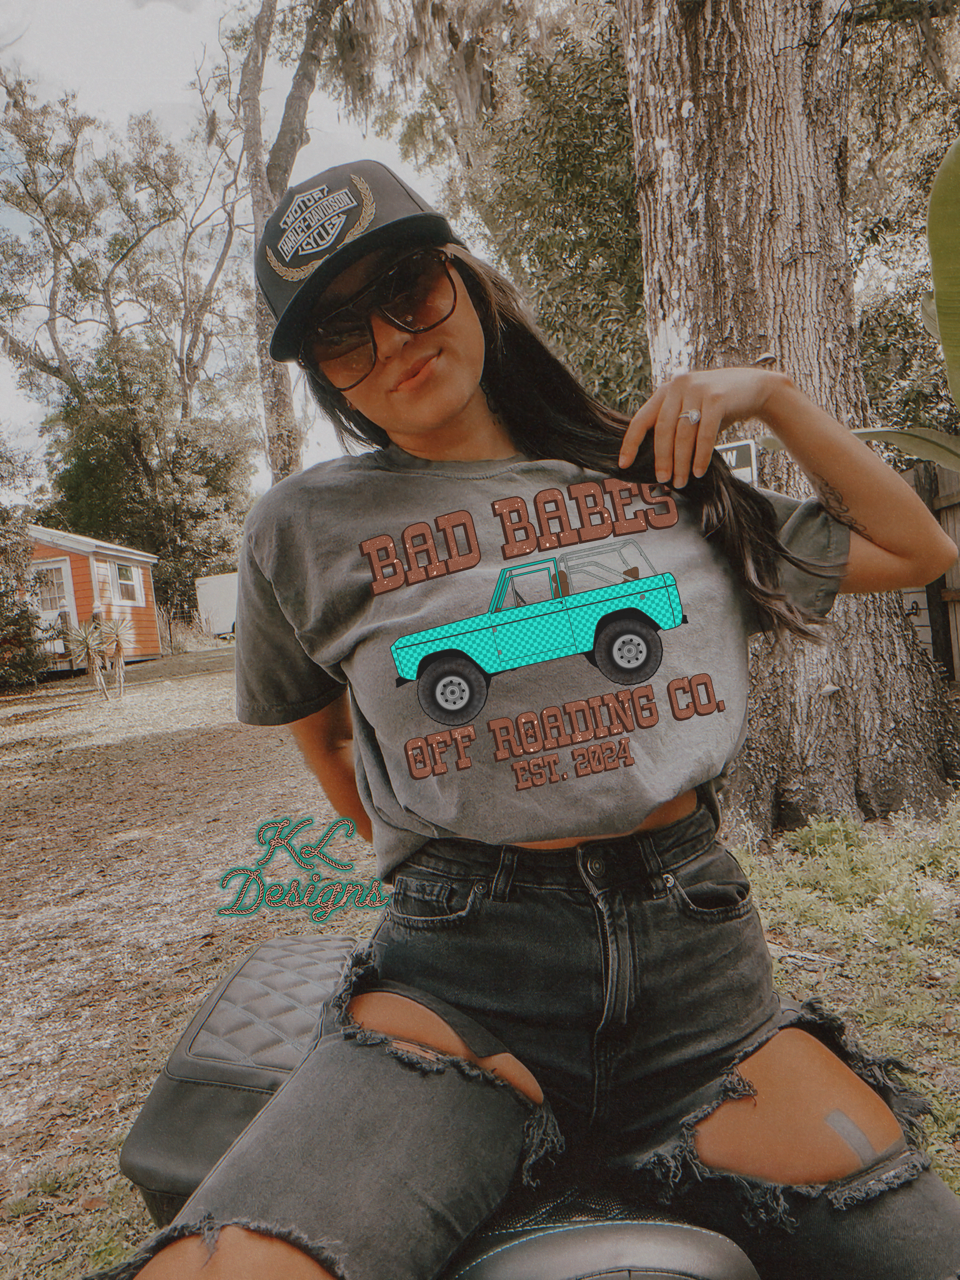 Bad Babes Off-Roading Co. - Preorder